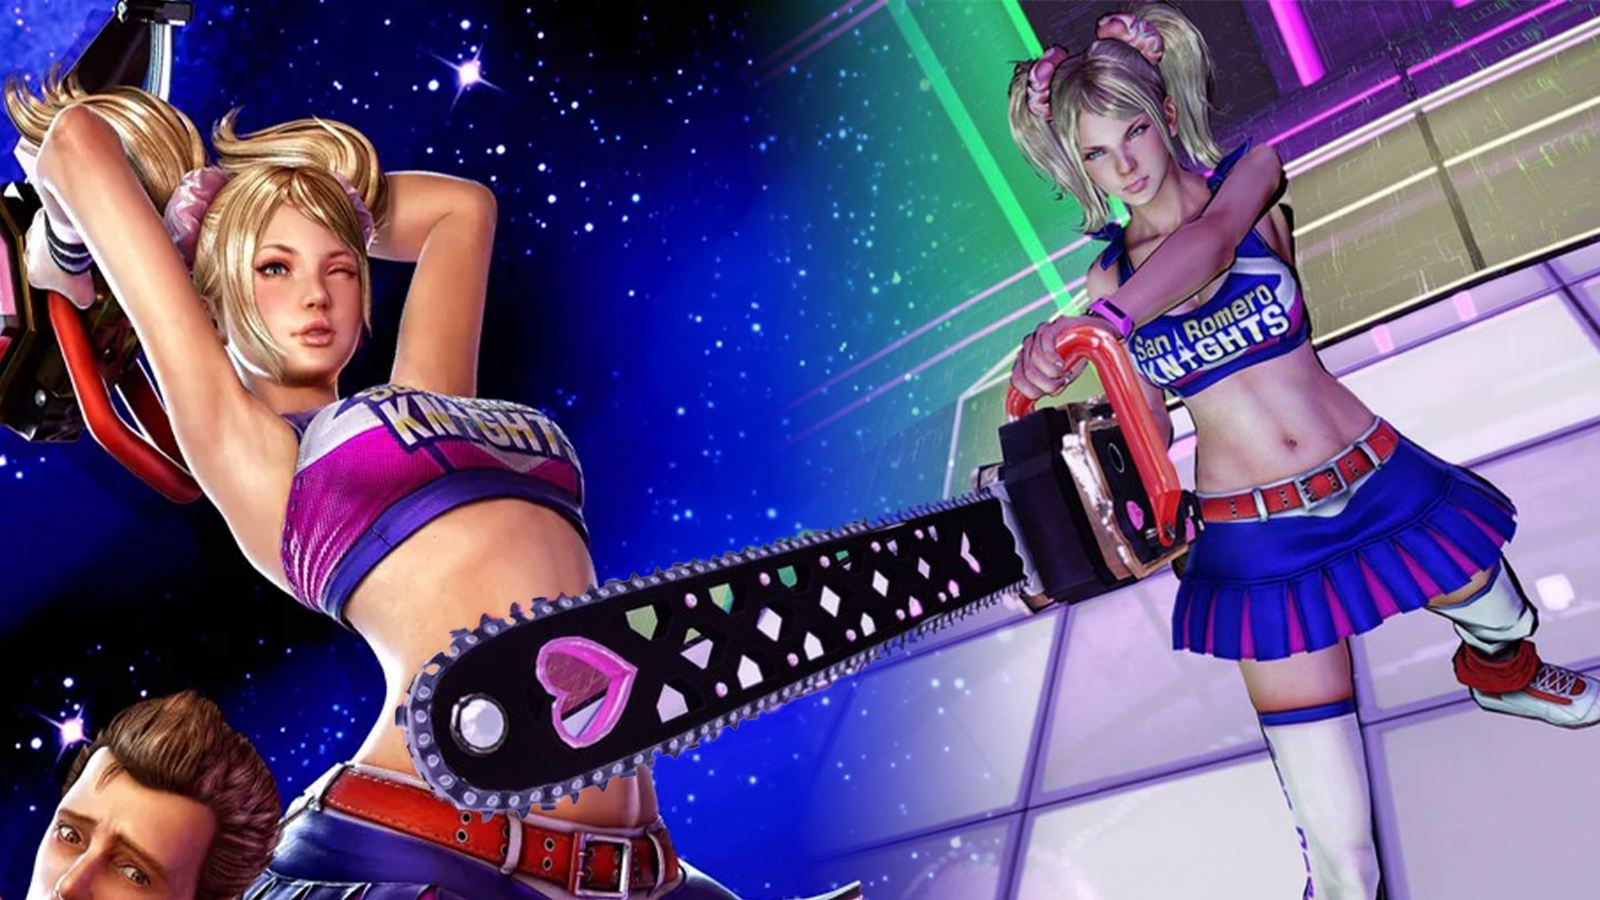 Lollipop Chainsaw remake delayed, but gets a new name